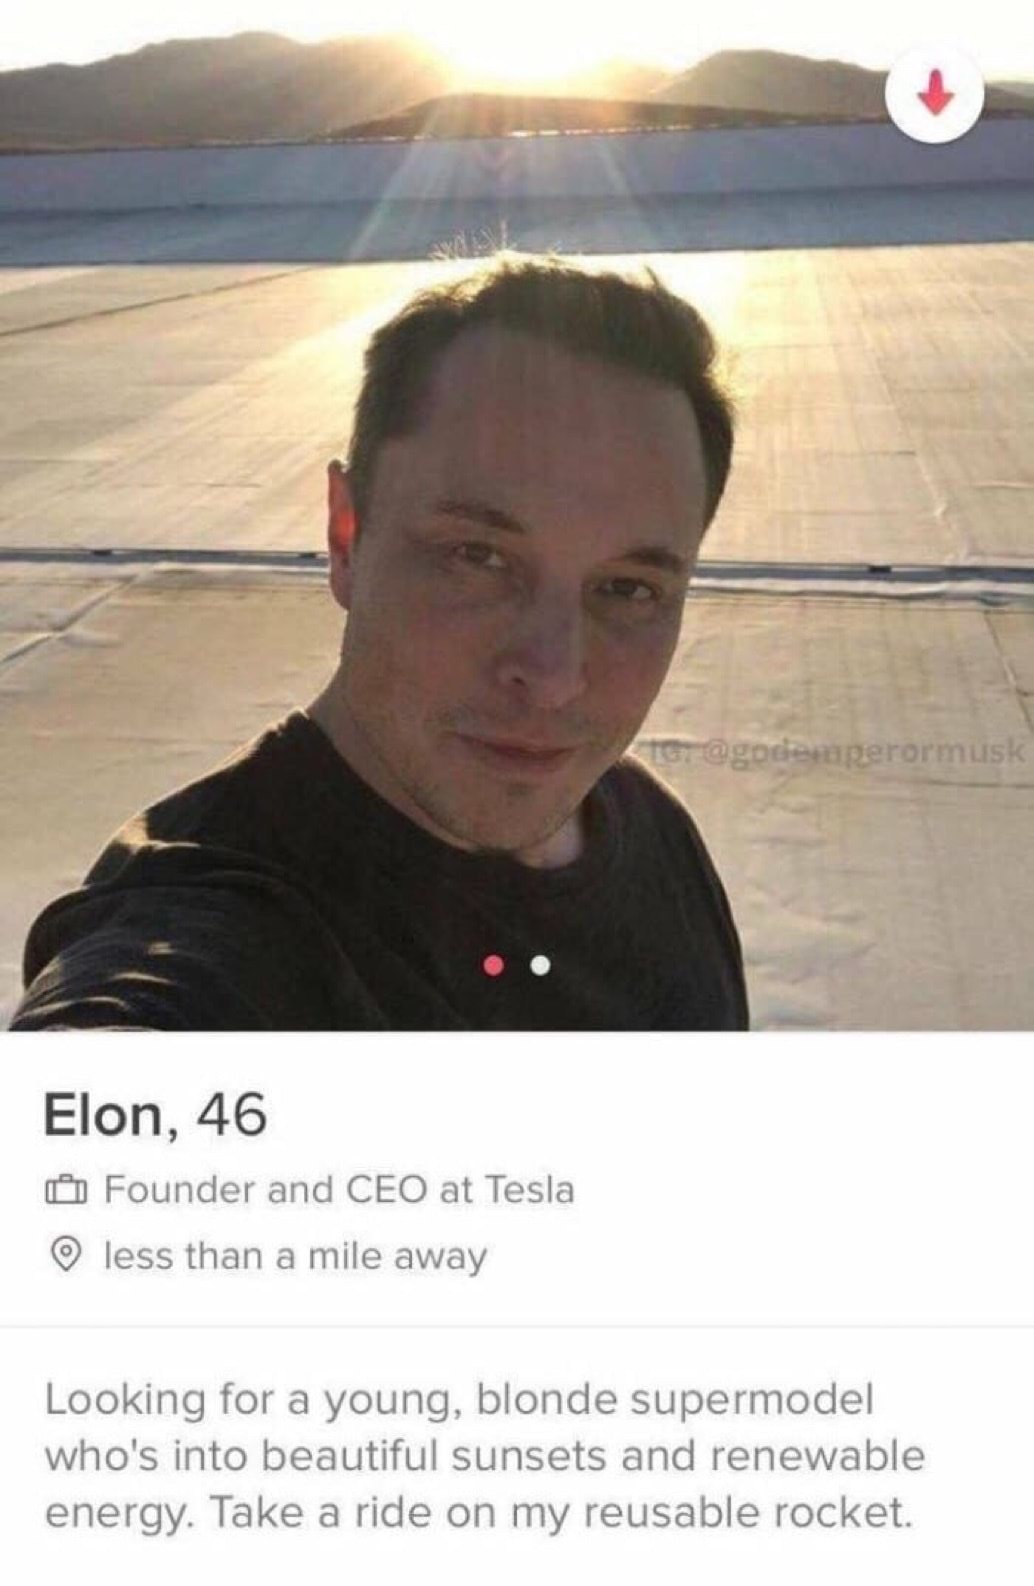 meme - elon musk tinder - ter Elon, 46 Founder and Ceo at Tesla less than a mile away Looking for a young, blonde supermodel who's into beautiful sunsets and renewable energy. Take a ride on my reusable rocket.